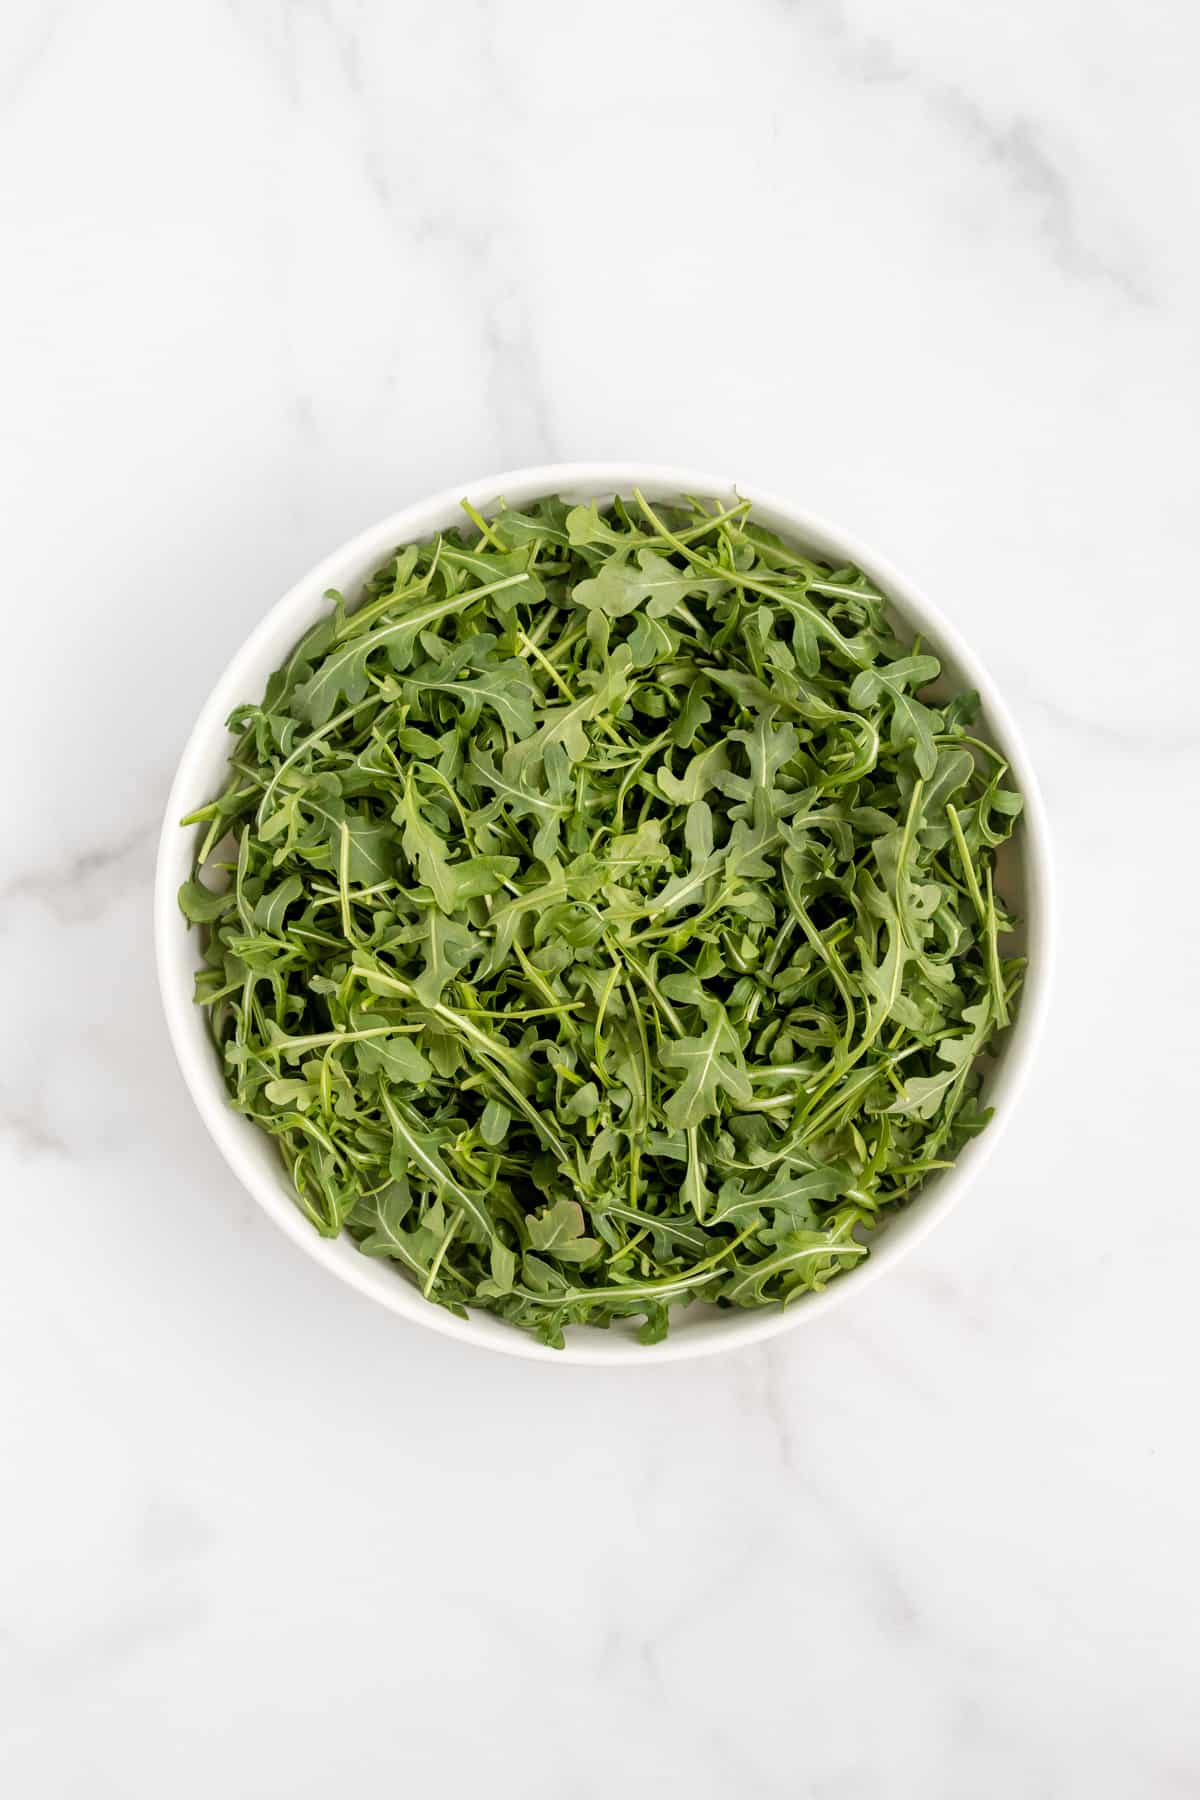 A bed of arugula in a large white bowl.